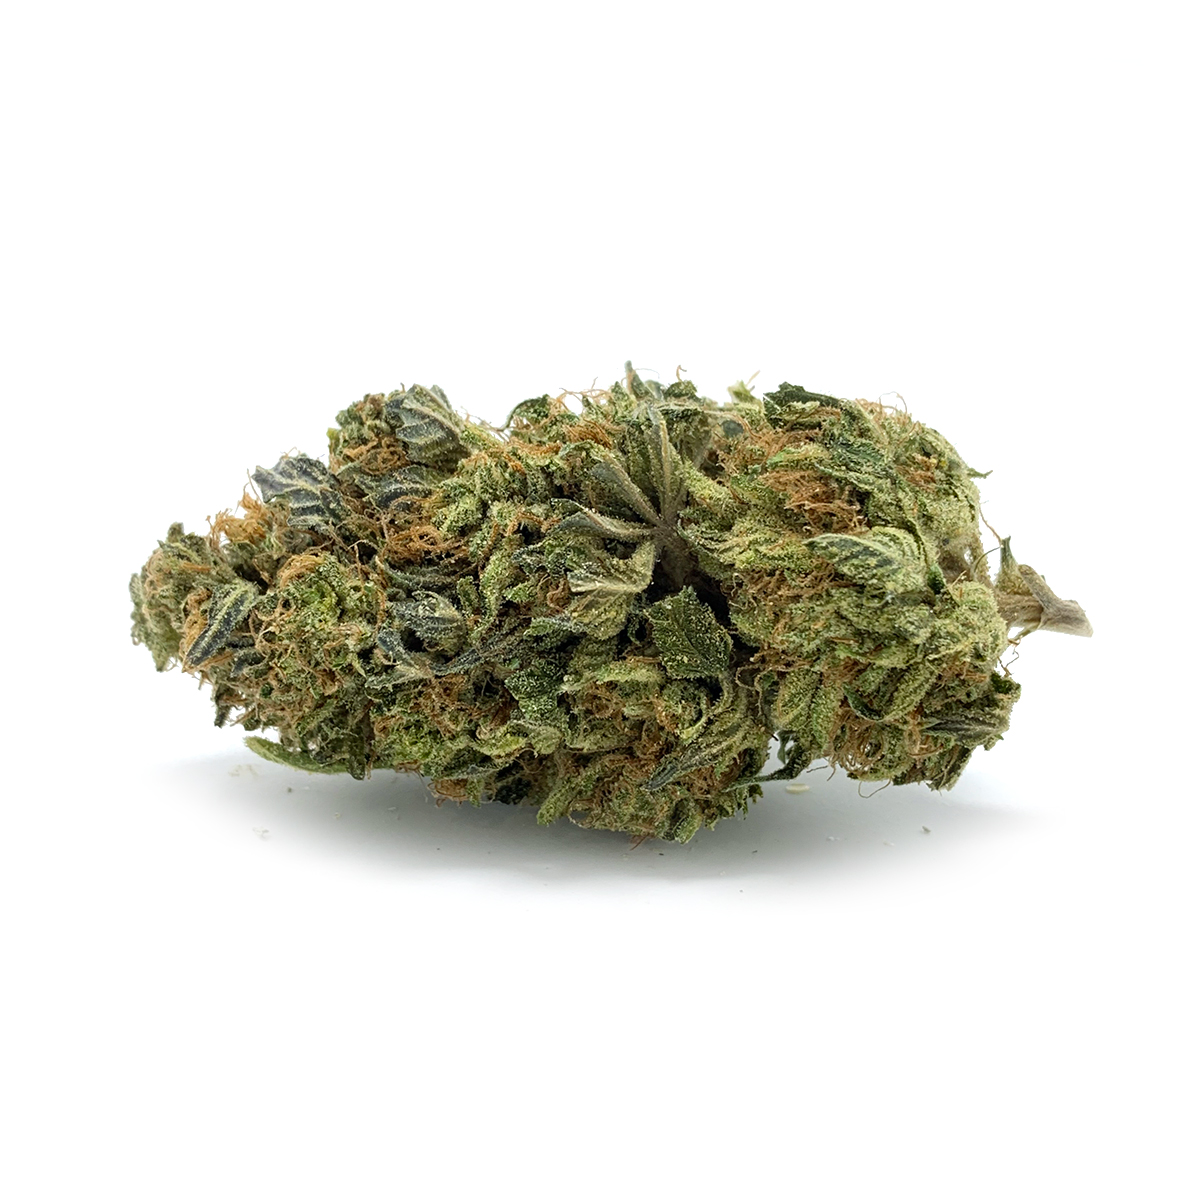 Budget Buds Pink Bubba Kush | Buy Weed Online | Dispensary Near Me